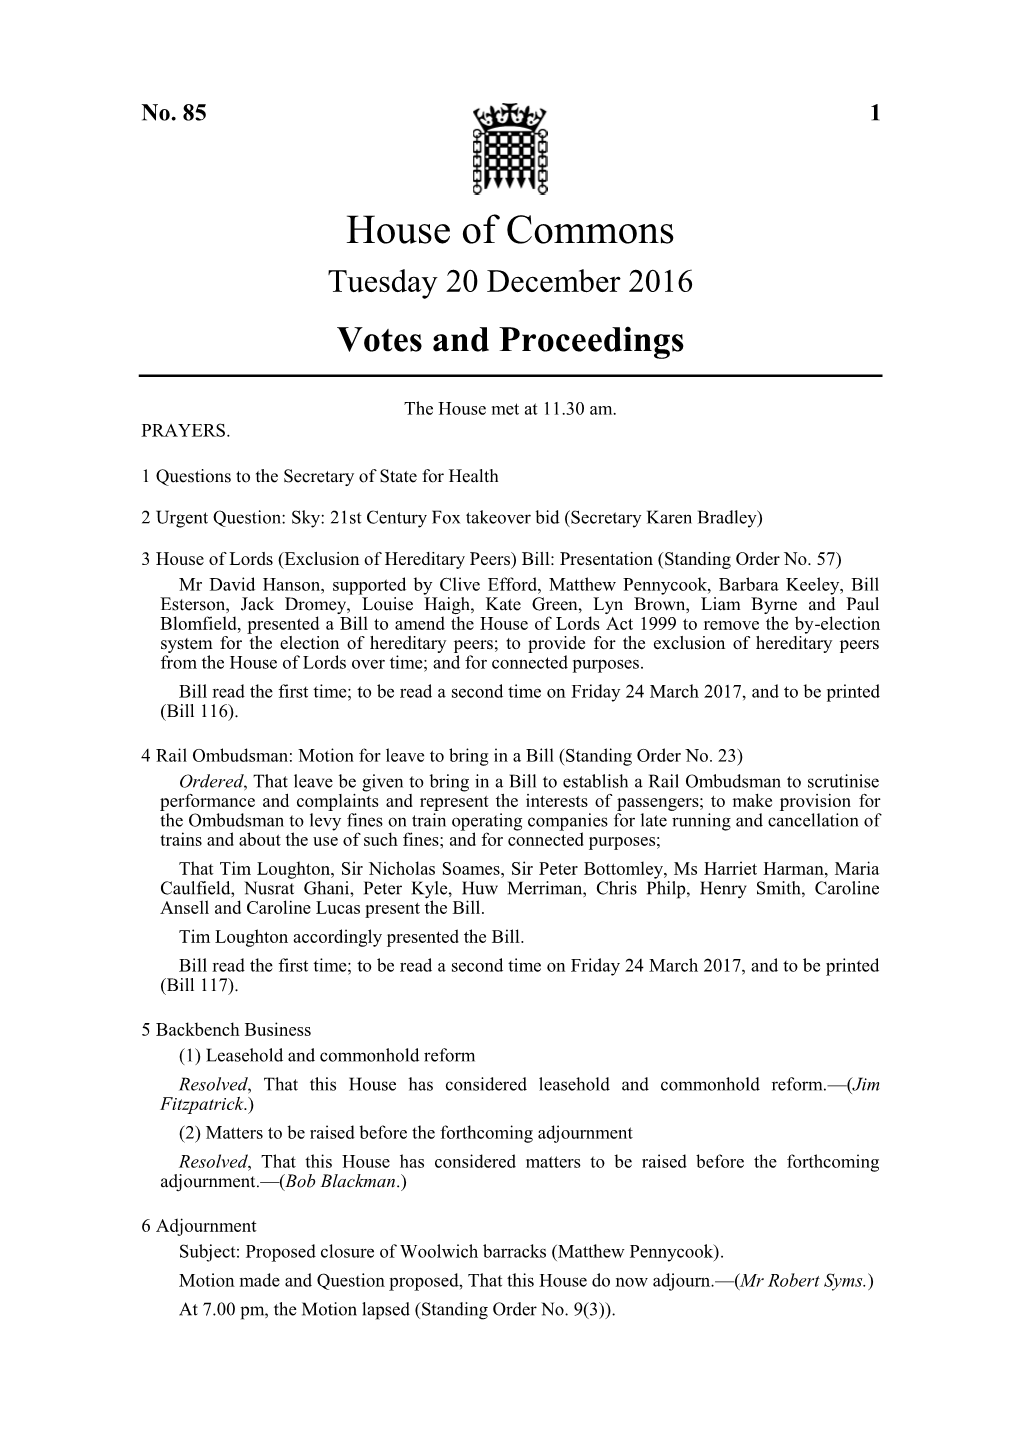 House of Commons Tuesday 20 December 2016 Votes and Proceedings